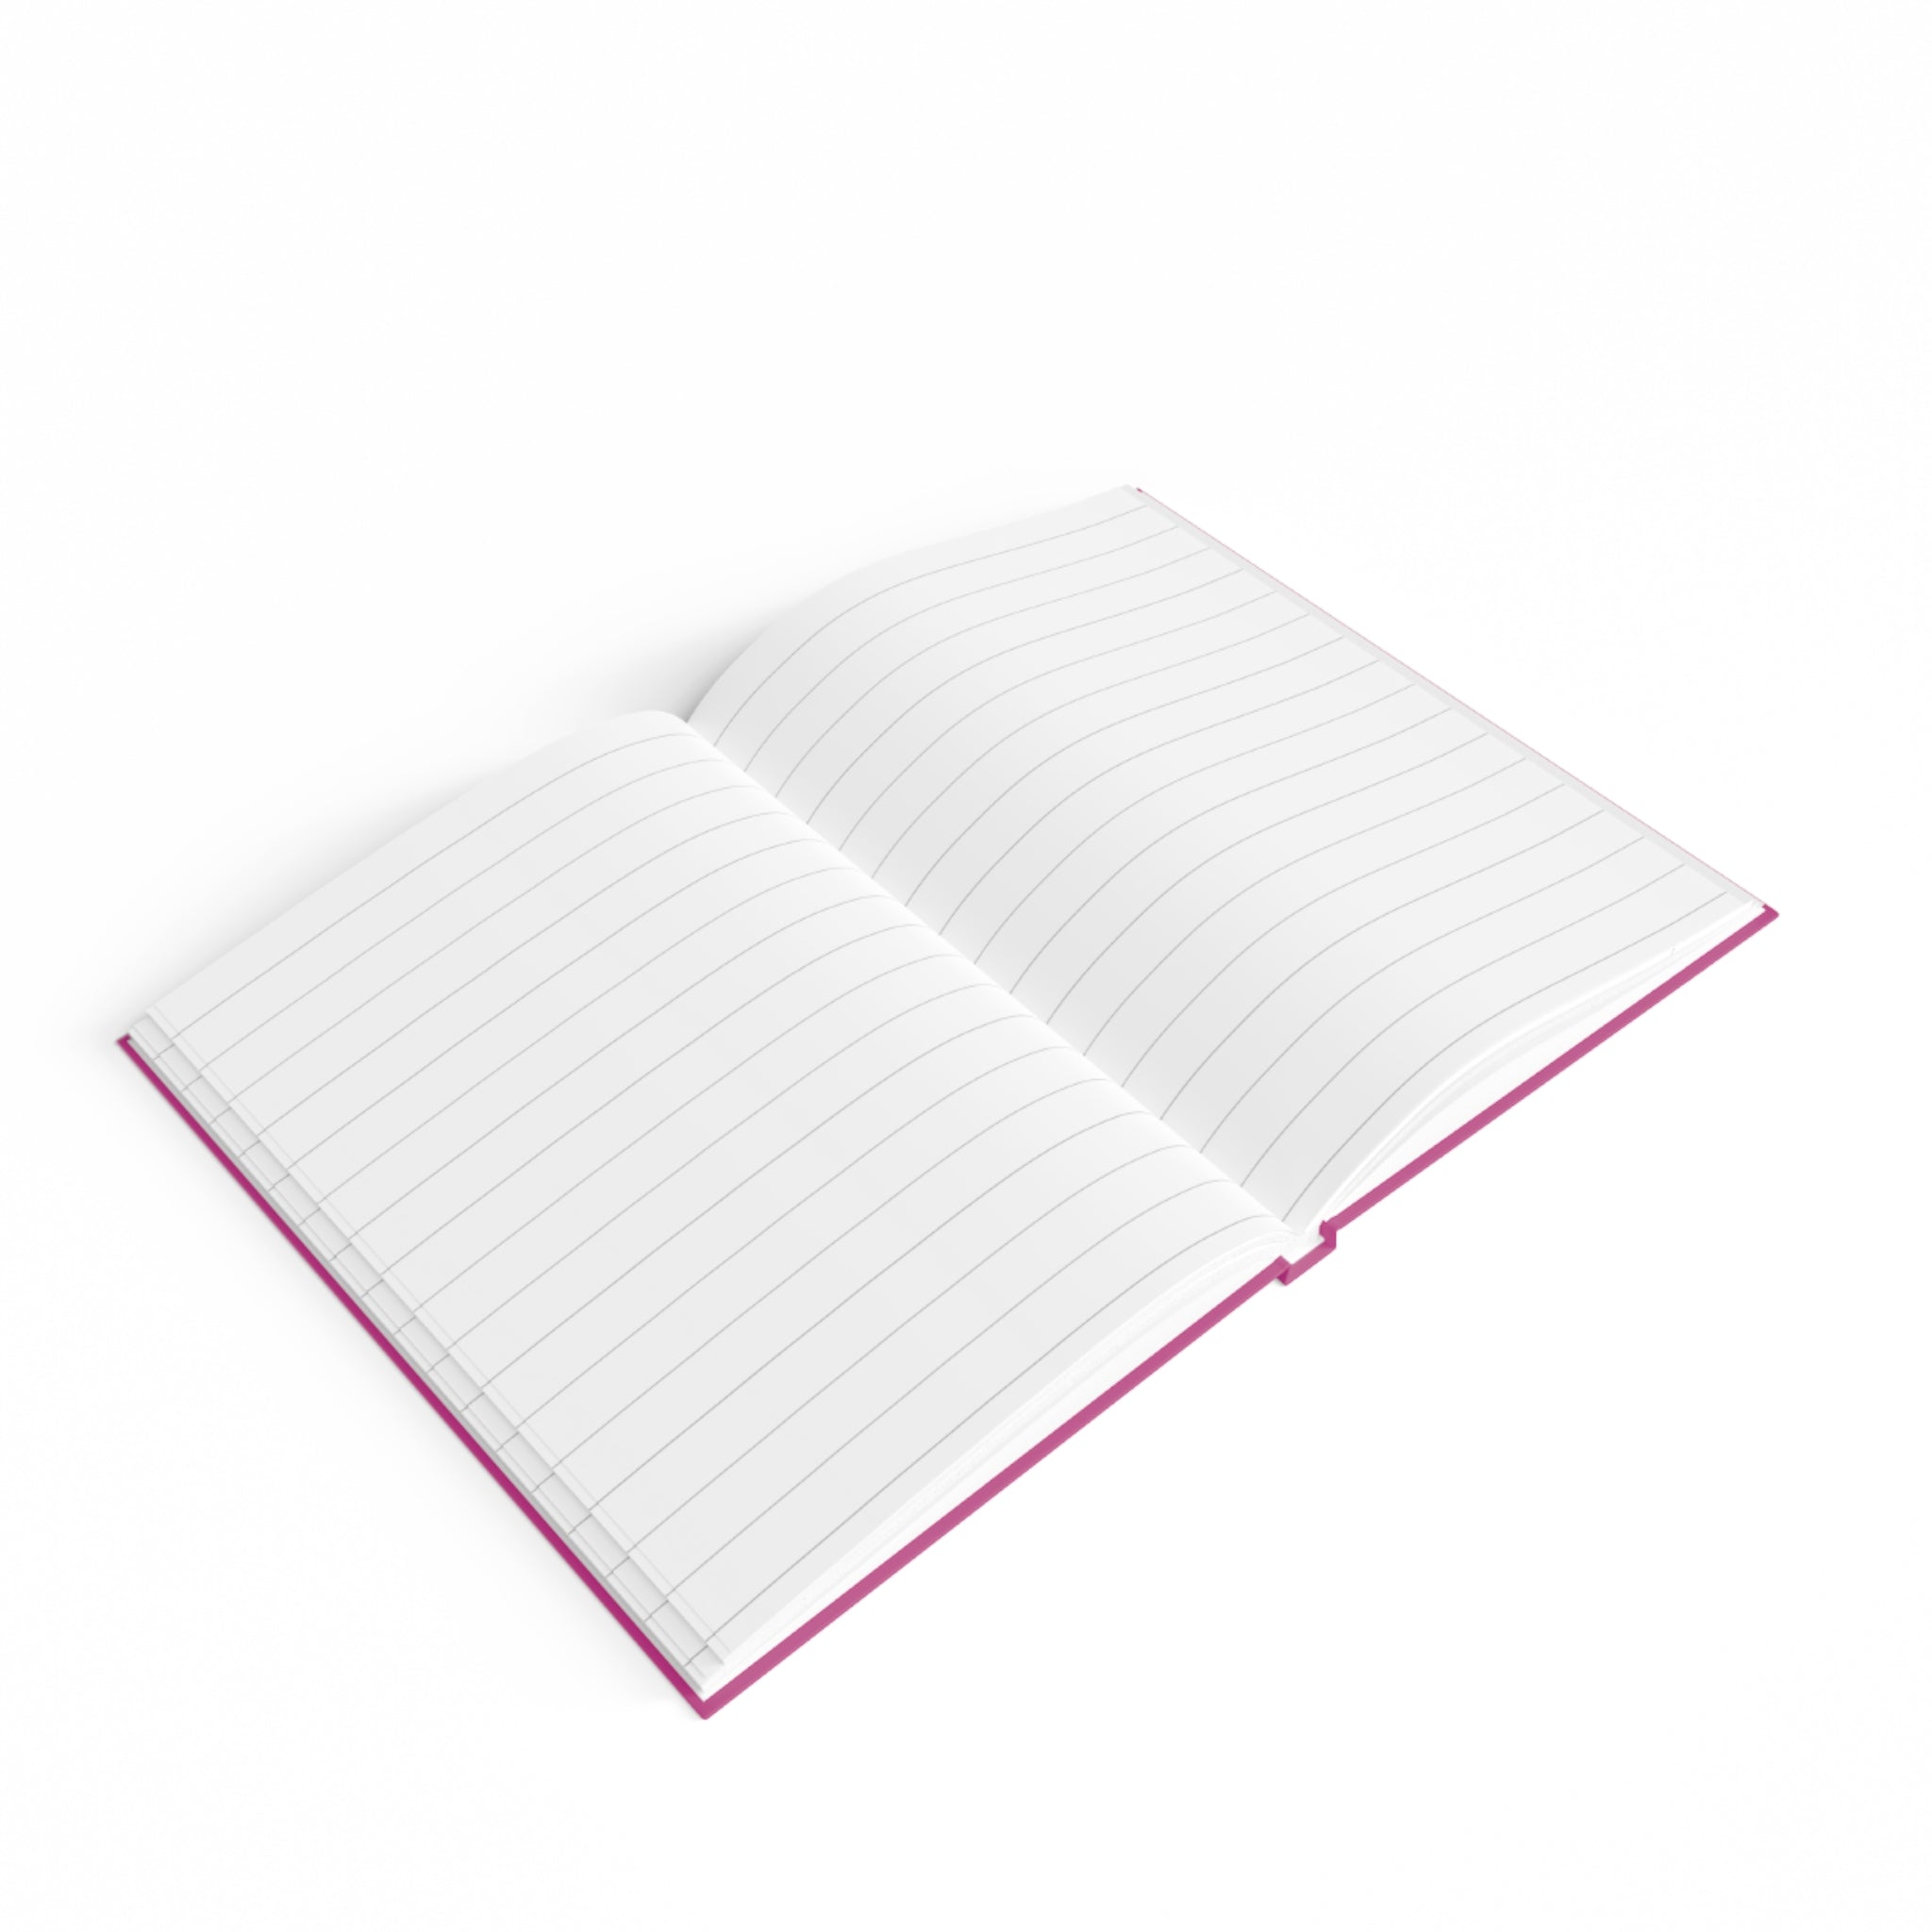  Bright Pink "Bitchie" Journal - Ruled Line, Lined Notebook, Gratitude Journal Paper products